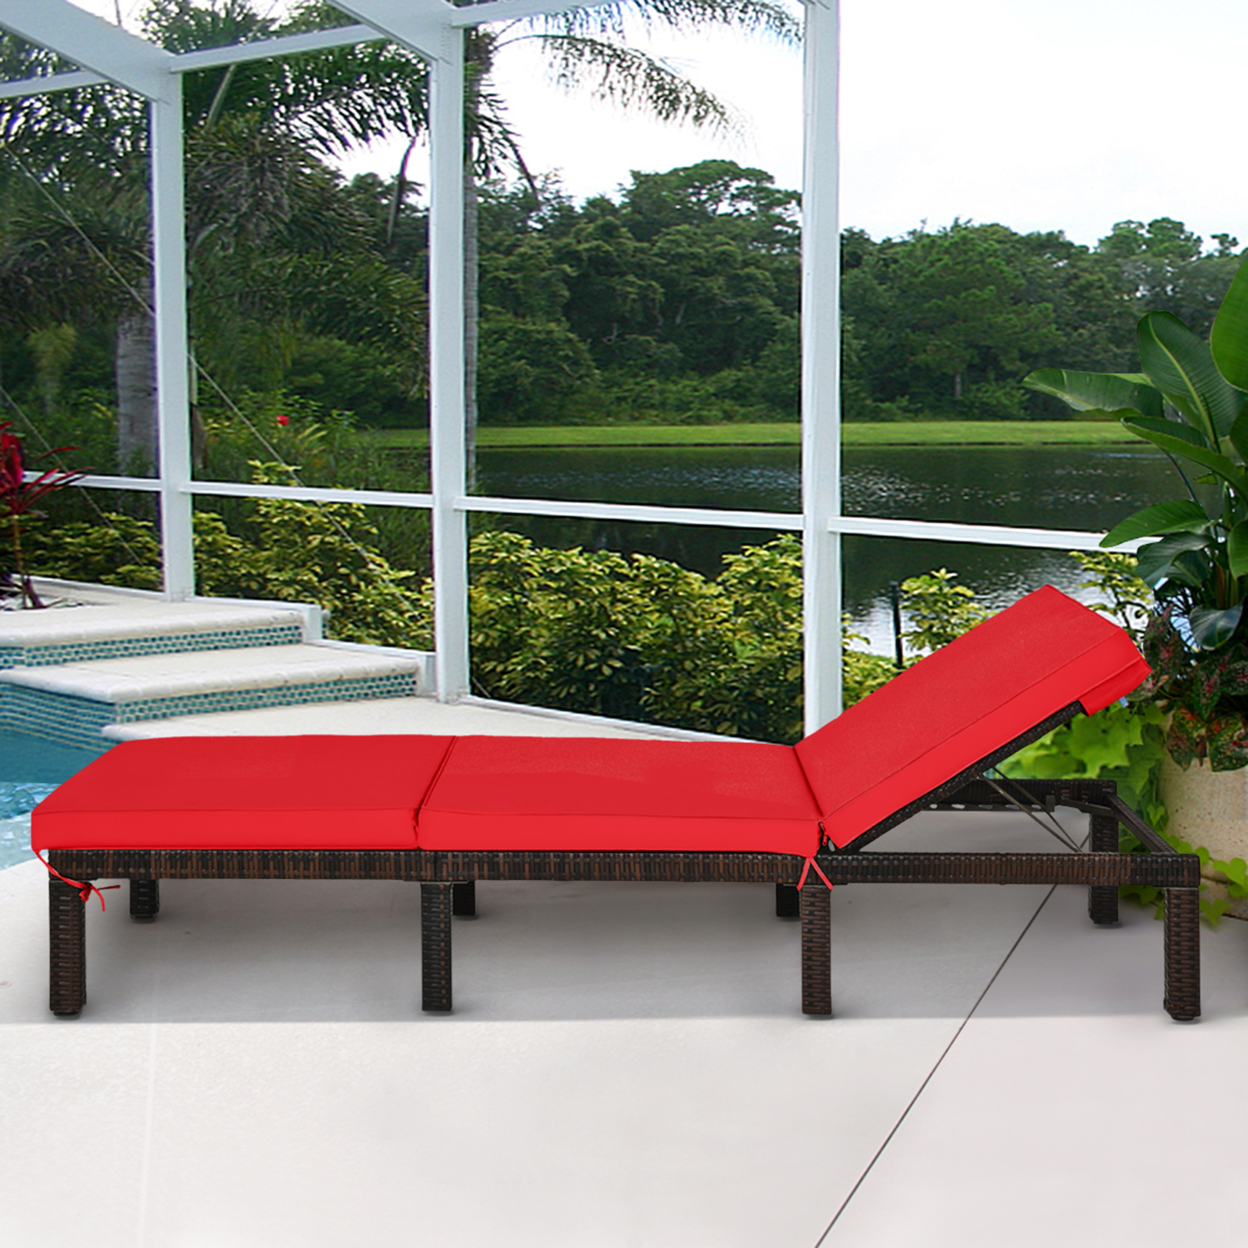 Adjustable Patio Rattan Chaise Lounge Chair Recliner Outdoor W/ Red Cushion